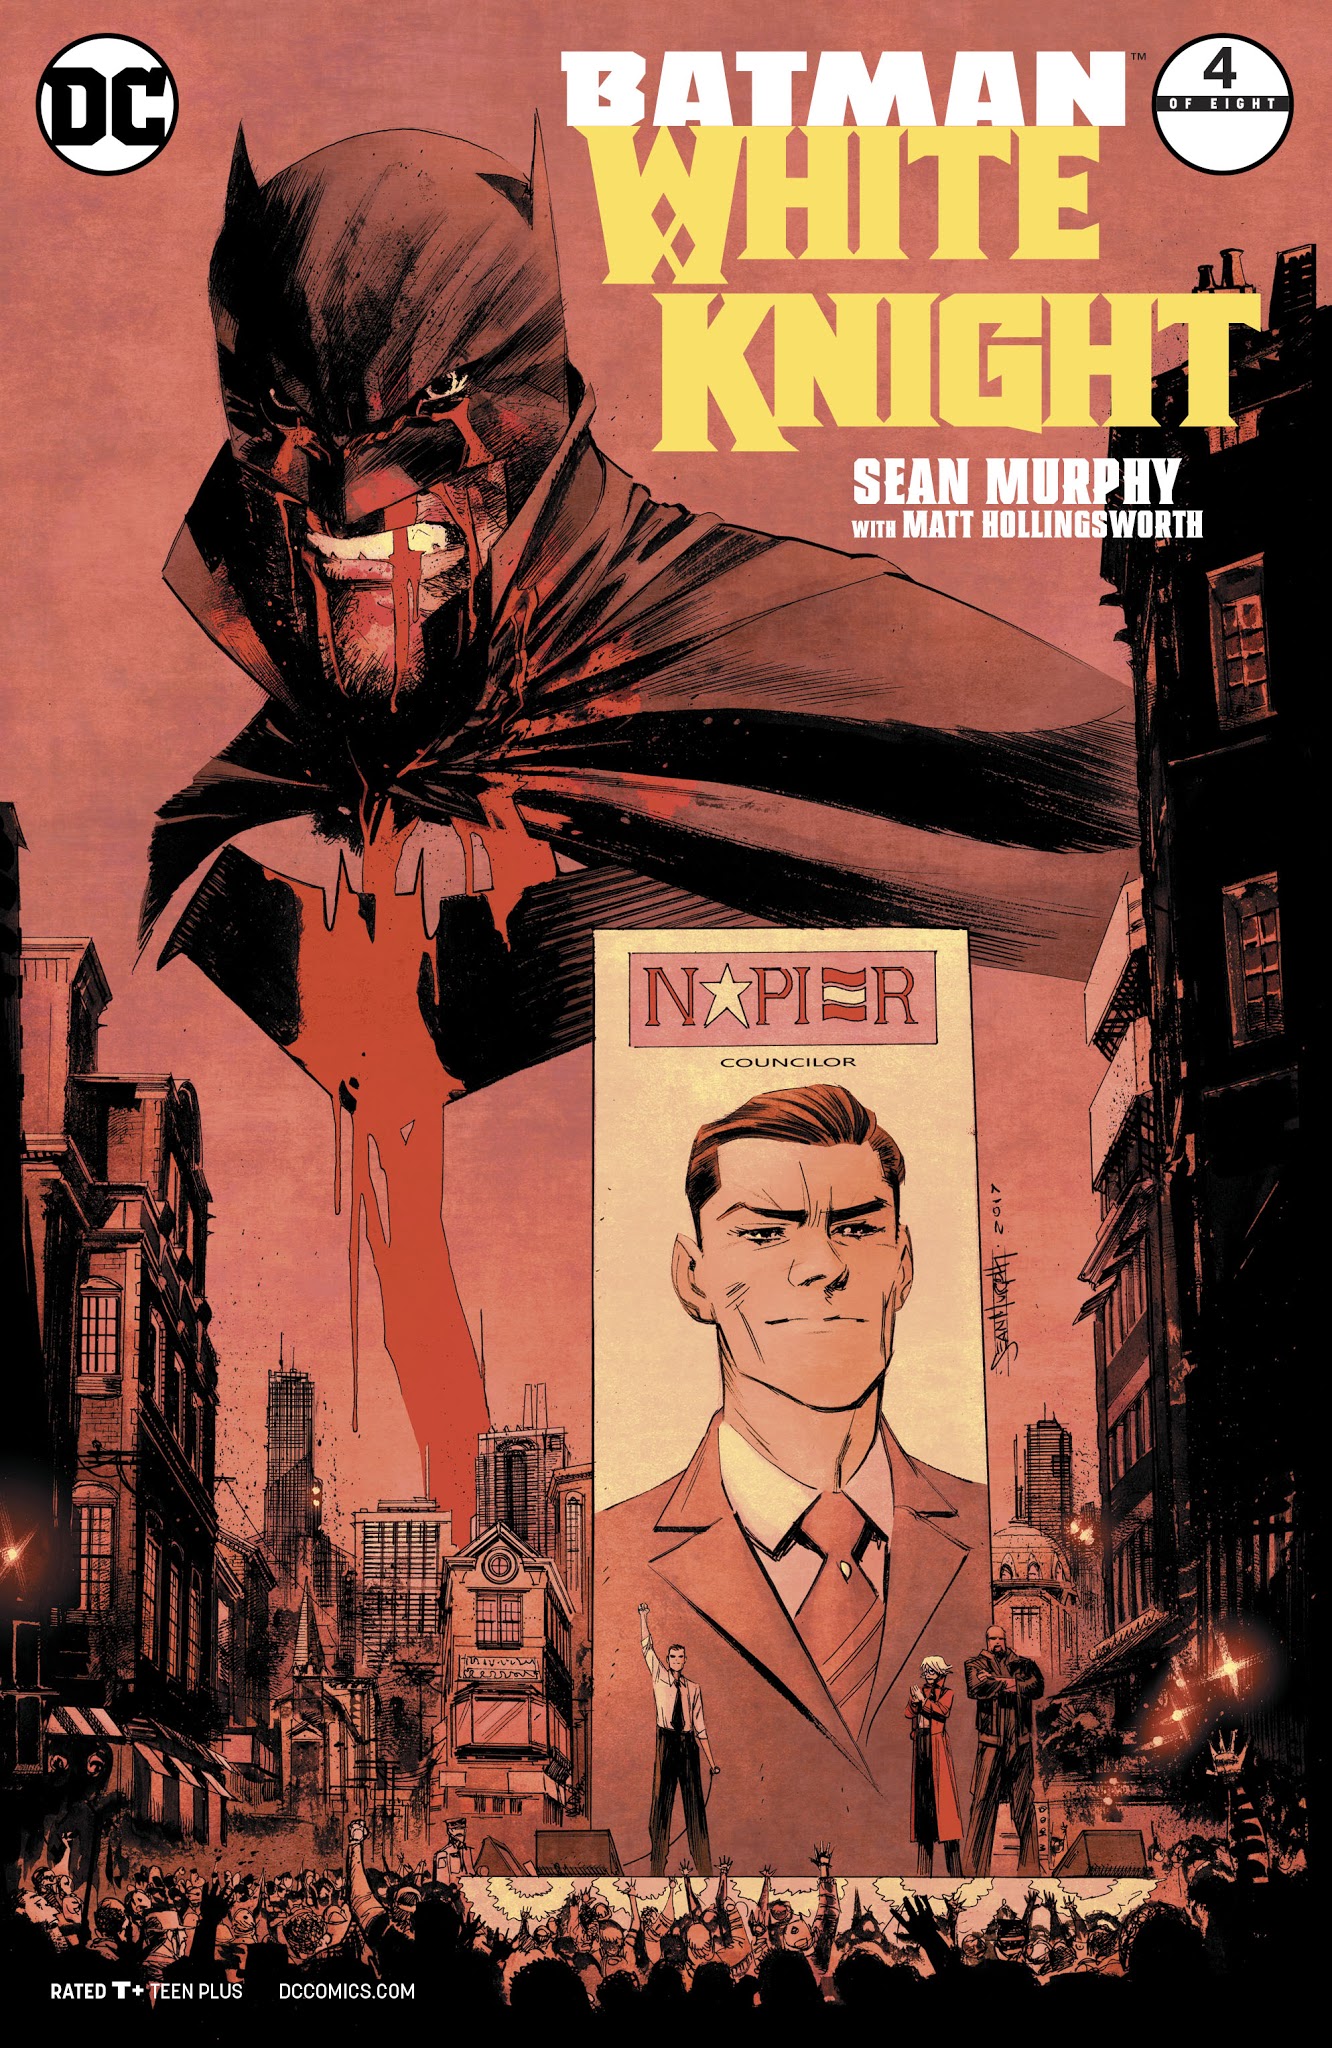 Batman White Knight Issue 4 | Read Batman White Knight Issue 4 comic online  in high quality. Read Full Comic online for free - Read comics online in  high quality .|